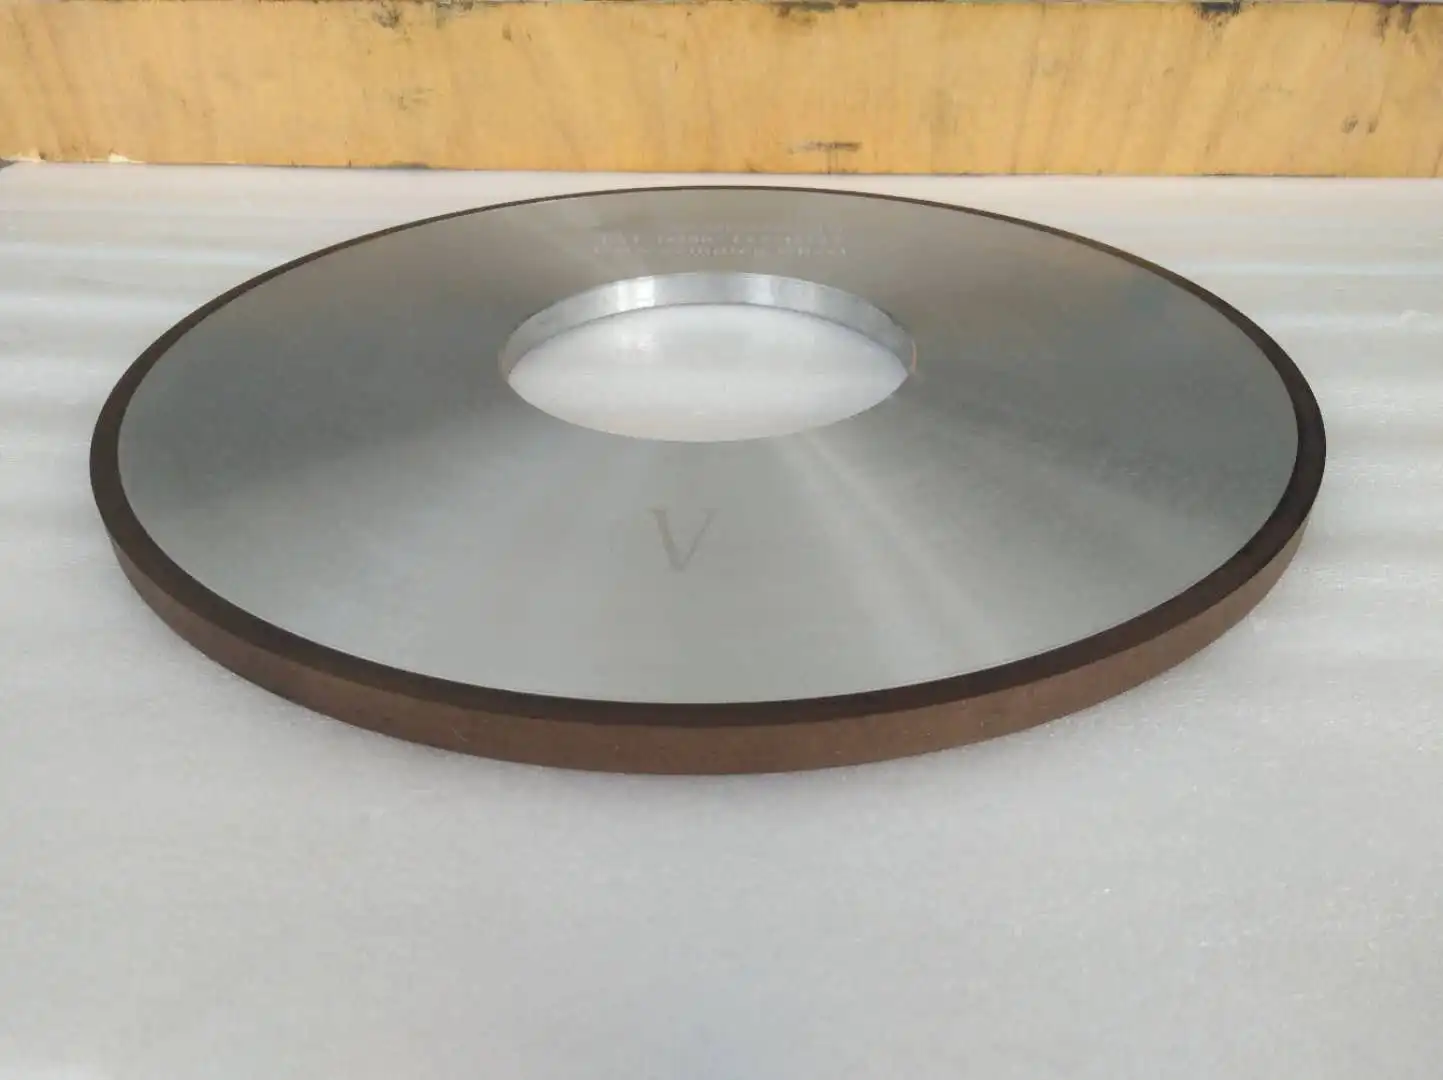 China high precision 1a1 resin bond CBN grinding wheel for HSS tools with OD 200mm